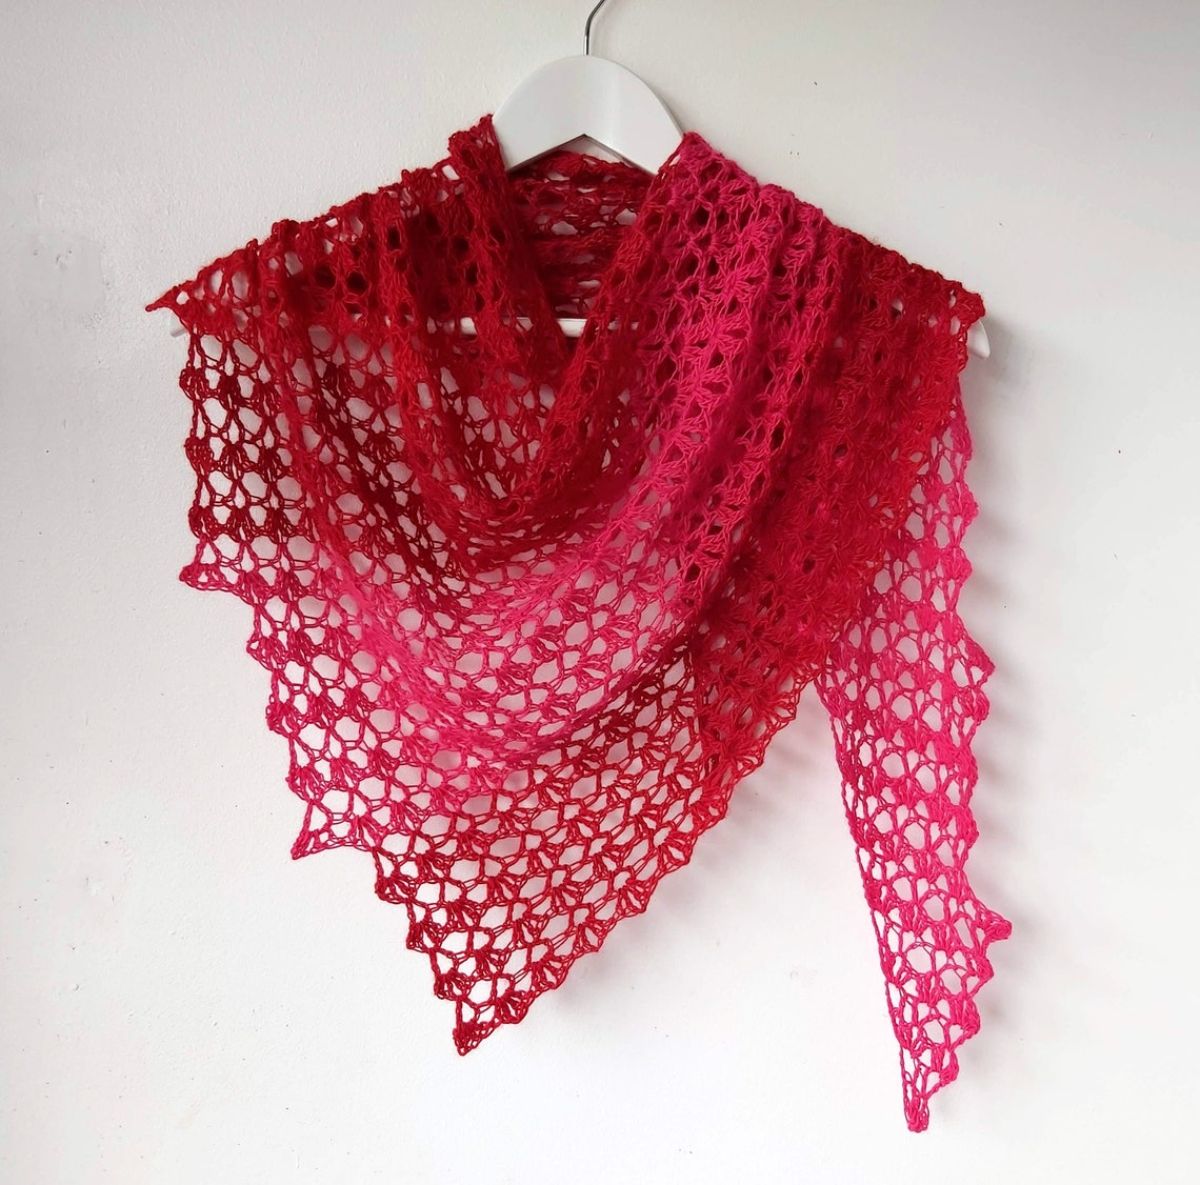 Loosely stitched lace style red crochet skein scarf with a slight scalloped edge draped over a white wooden hanger.